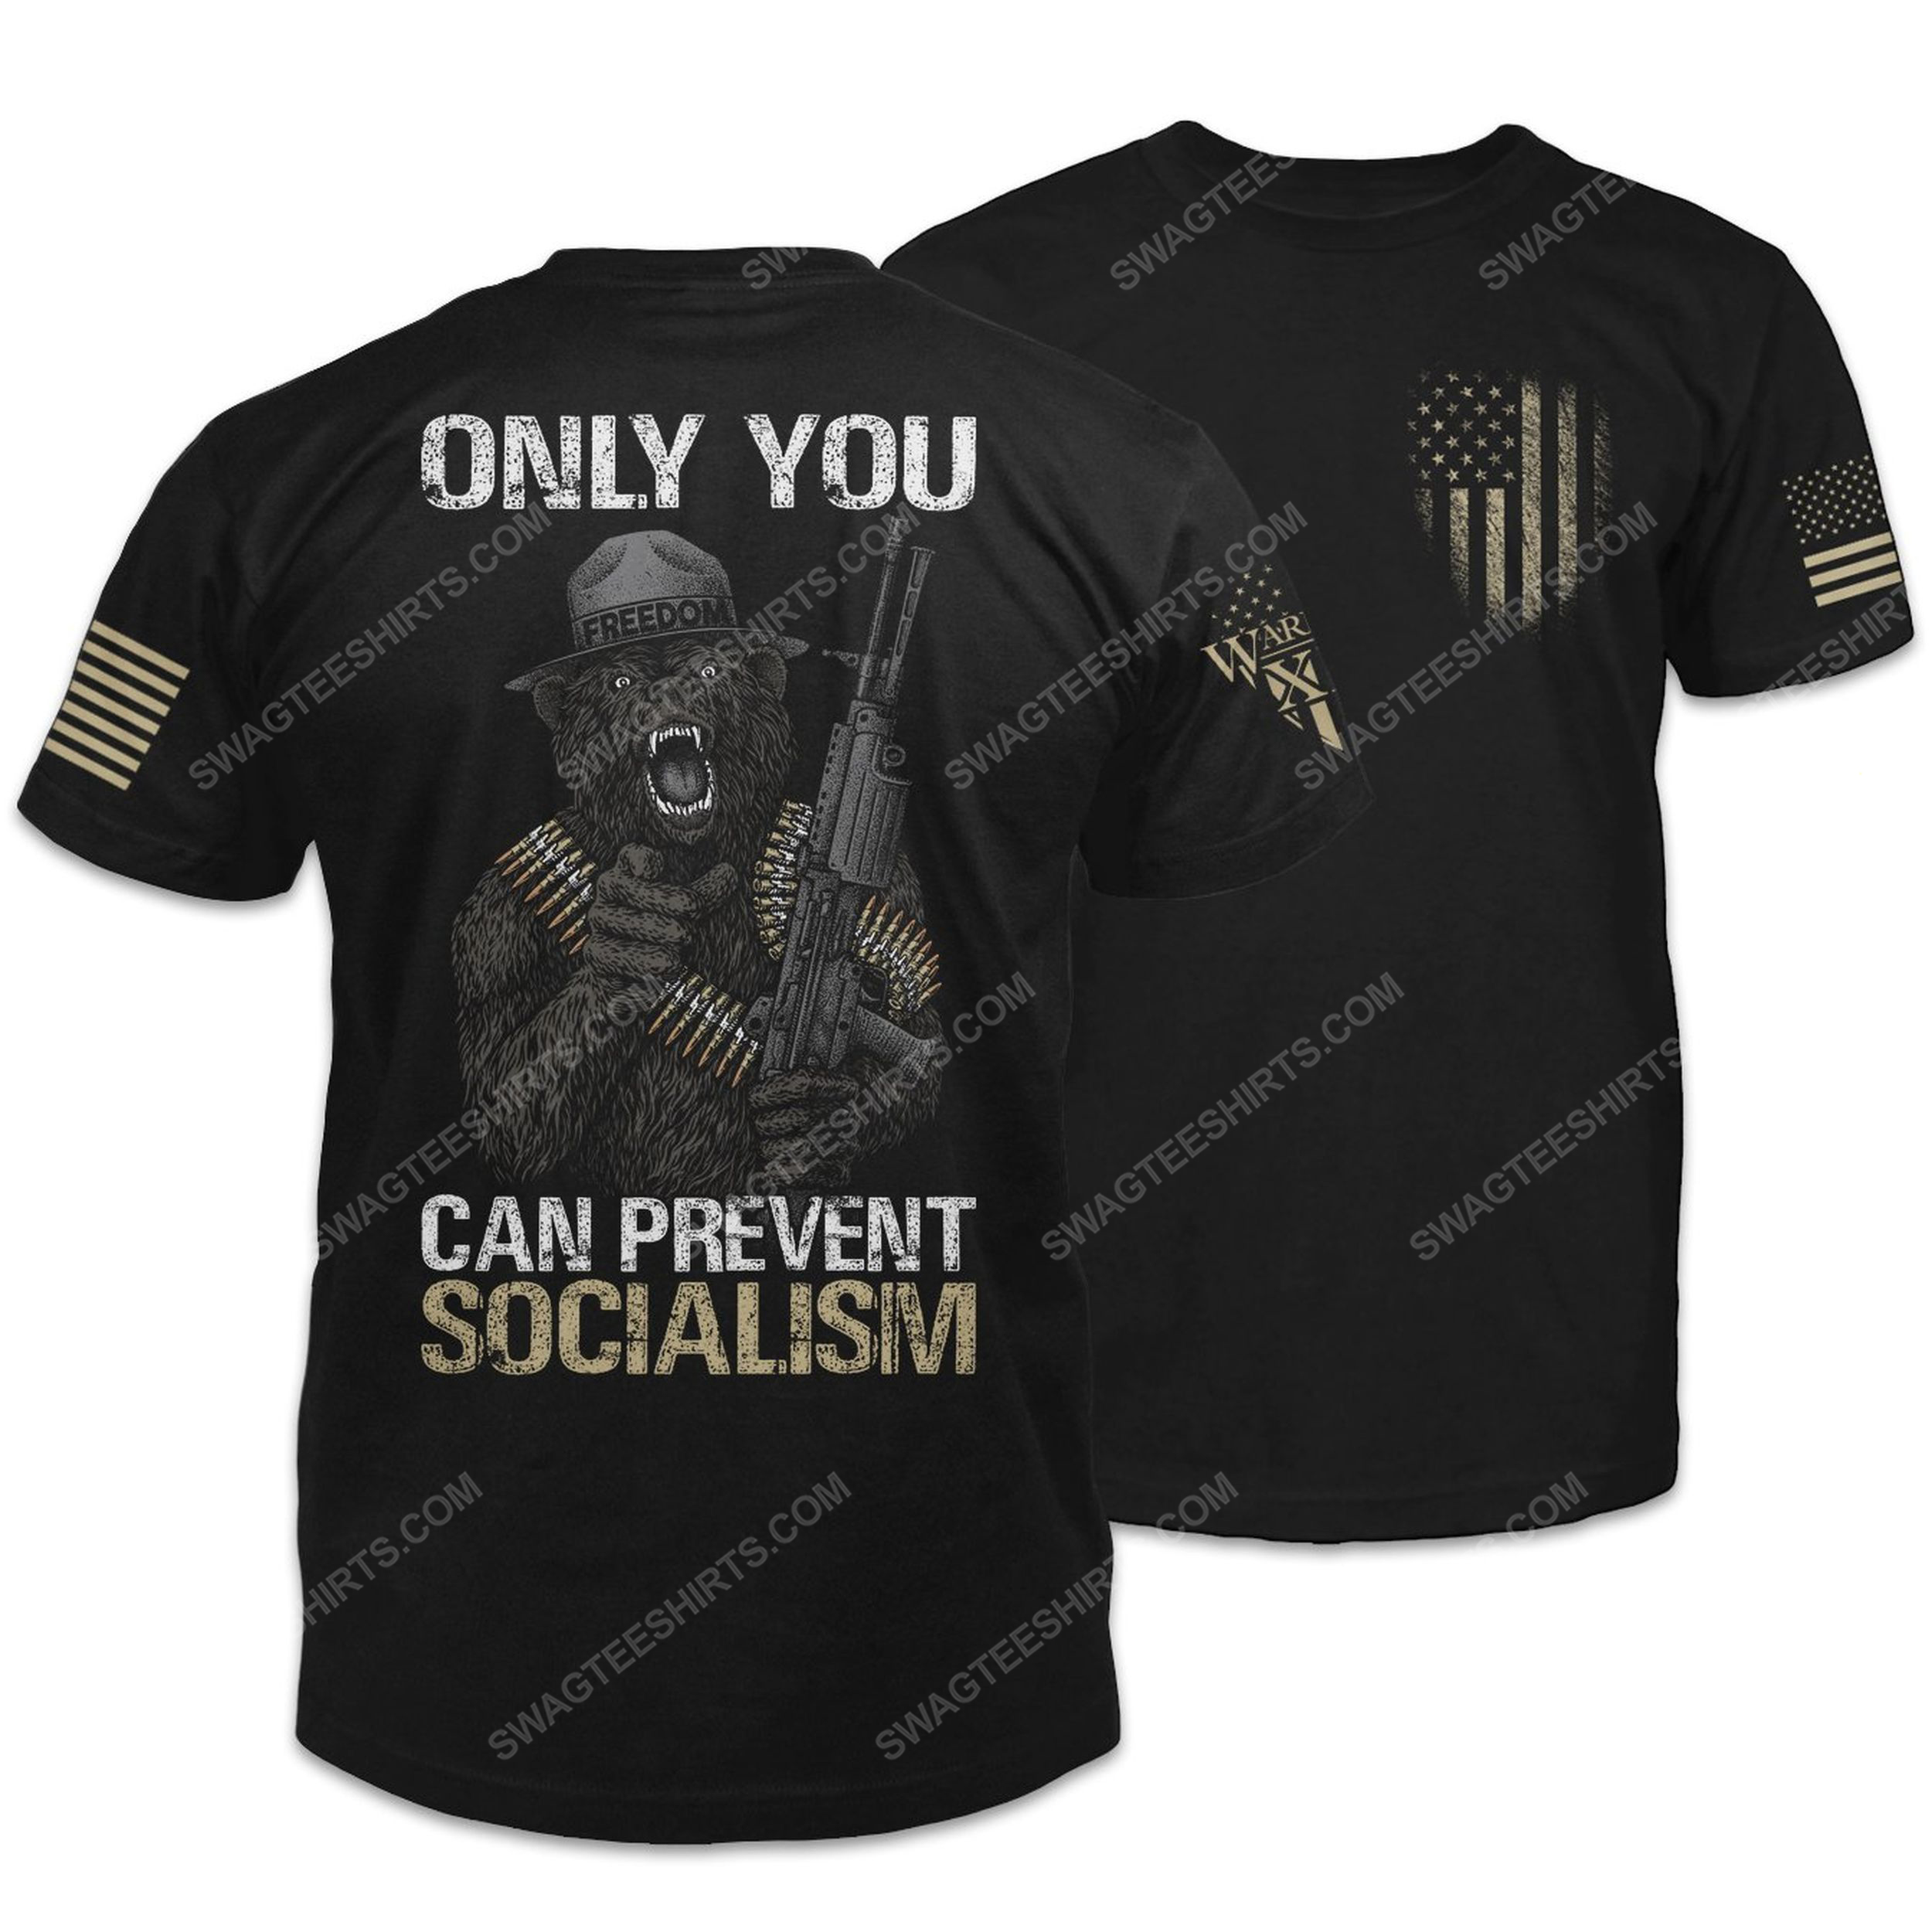 Only you can prevent socialism bear american flag shirt 2(1)